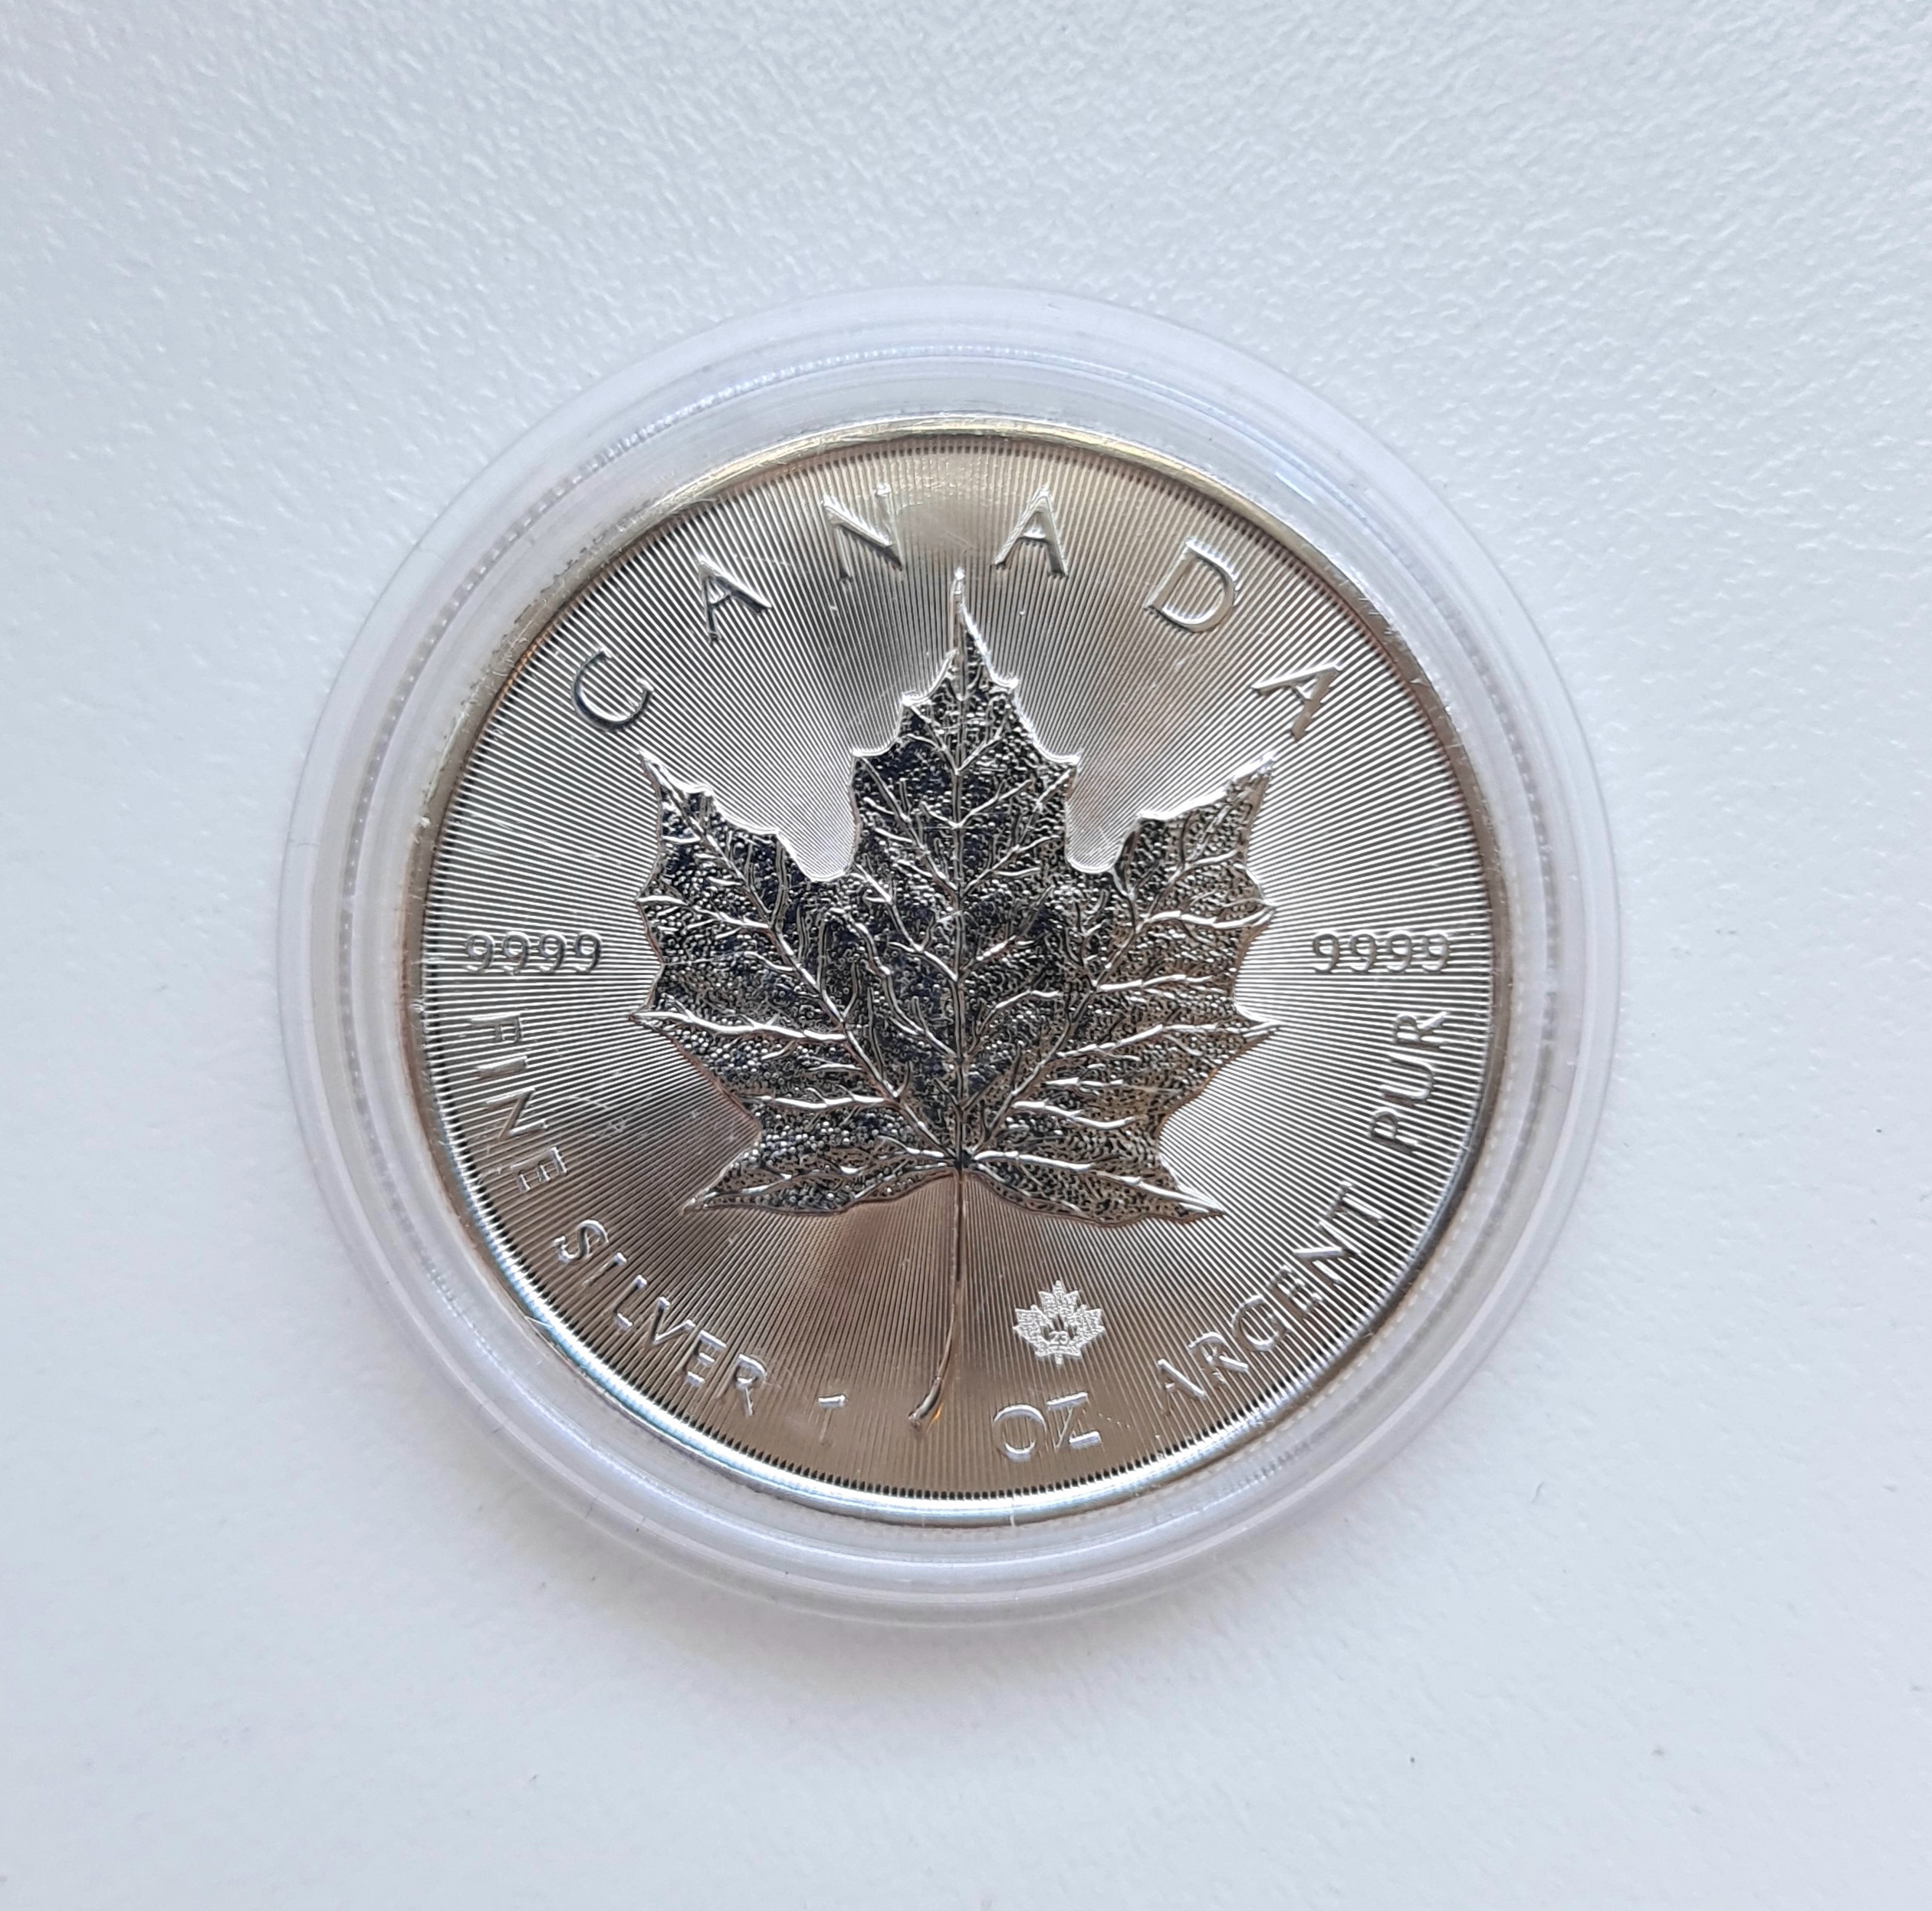 MAPLE LEAF 1 ONCE ARGENT FIN